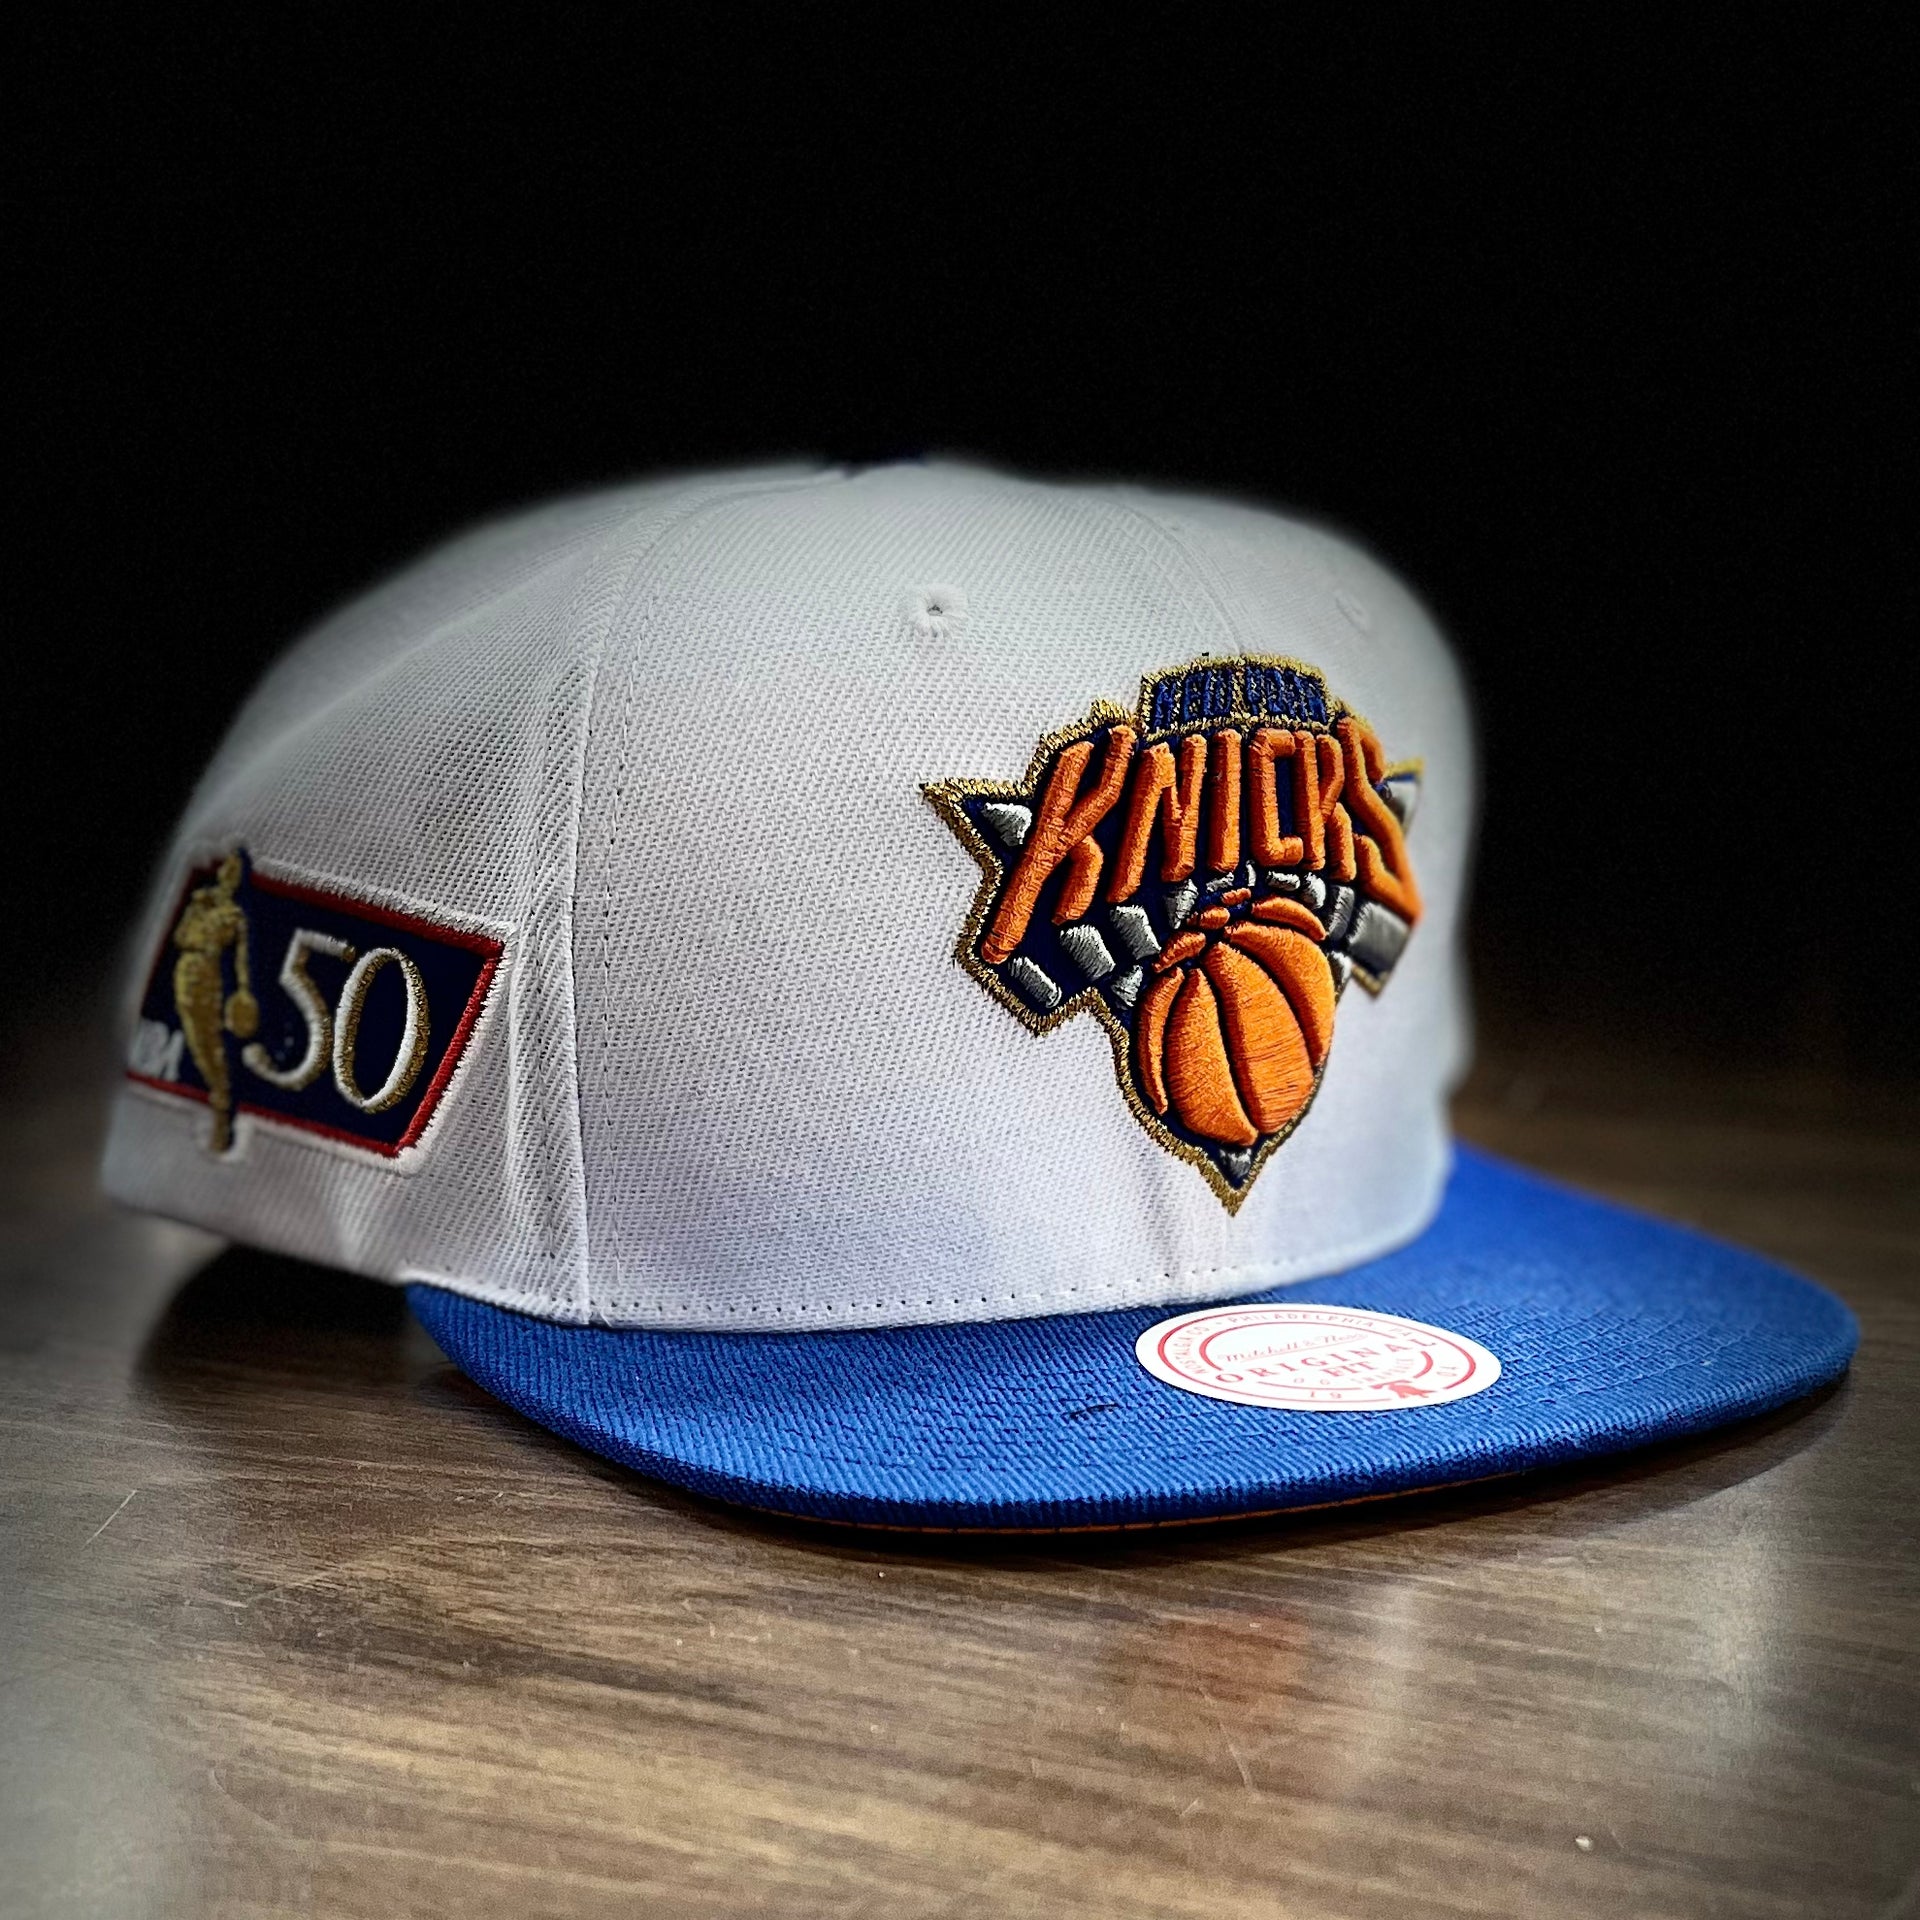 New York Knicks Vintage New Era Wool Fitted Cap Hat - Size: 6 7/8